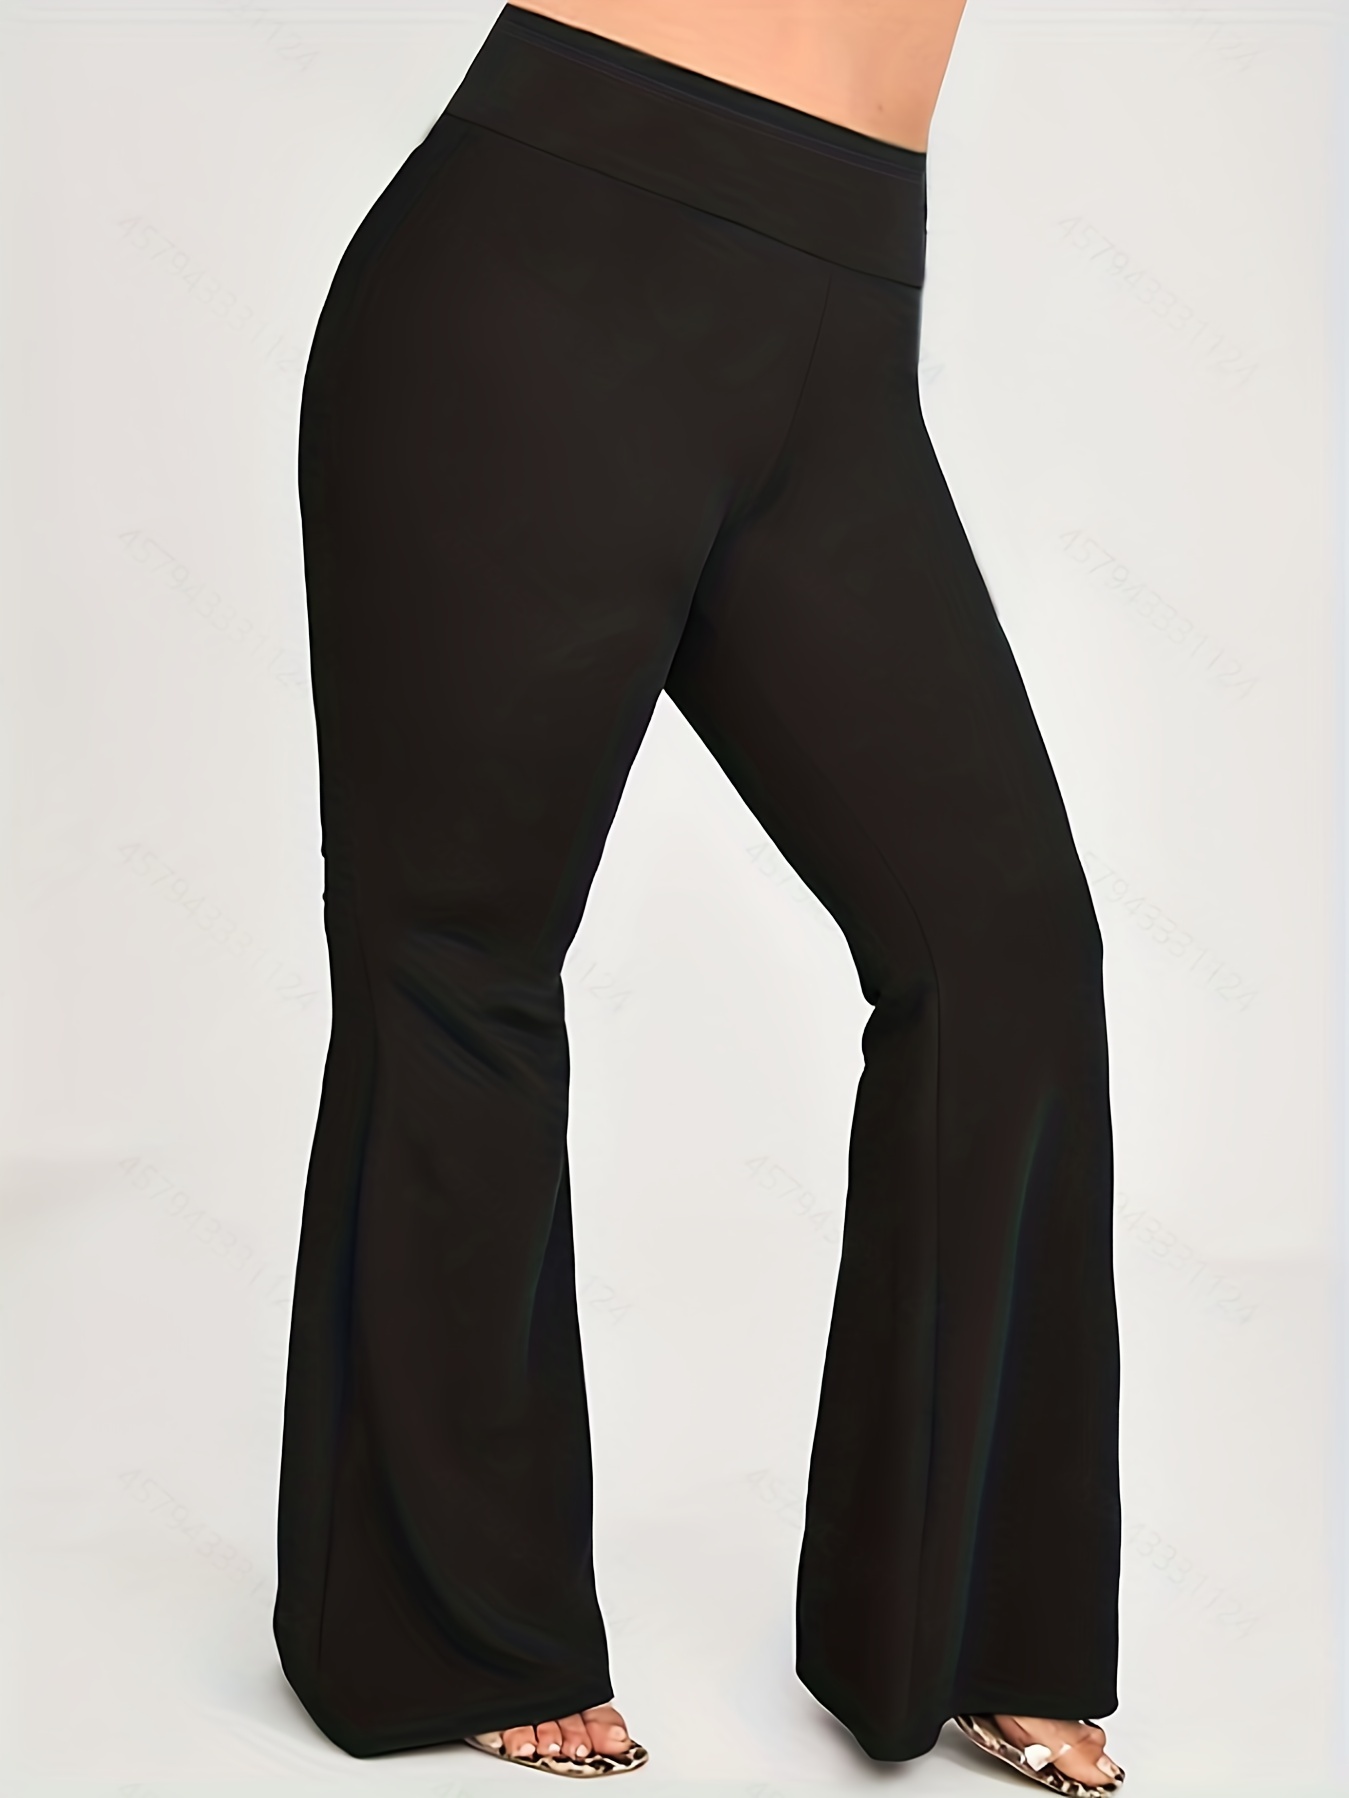 Plus Size Elegant Pants, Women's Plus Solid High Waisted High Stretch  Comfort Flare Leggings